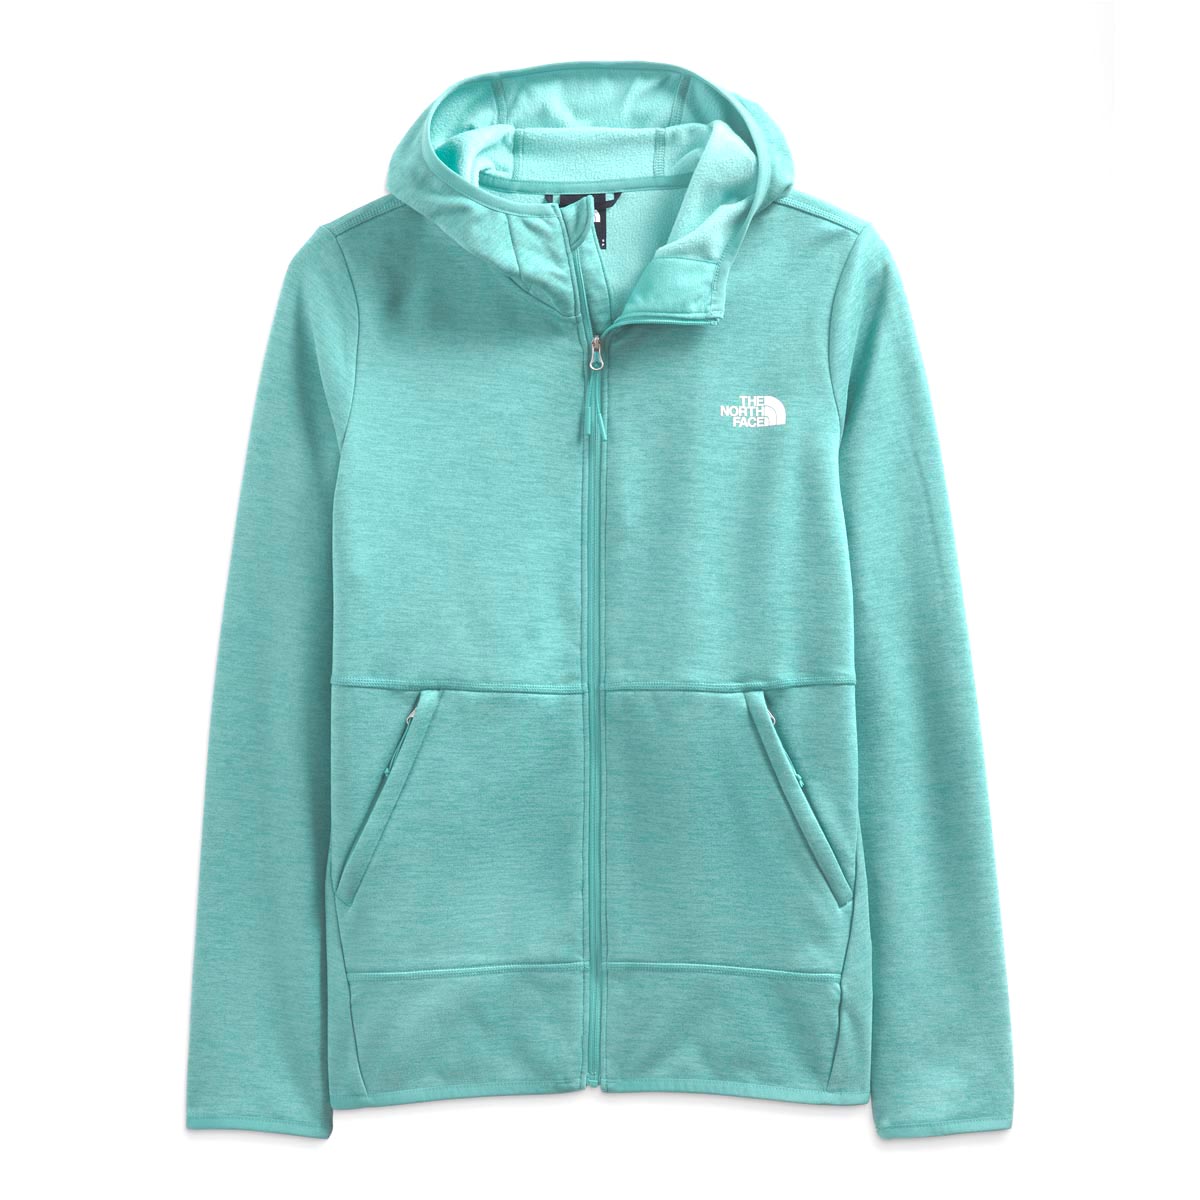 The North Face Women's Canyonlands Hoodie - Past Season